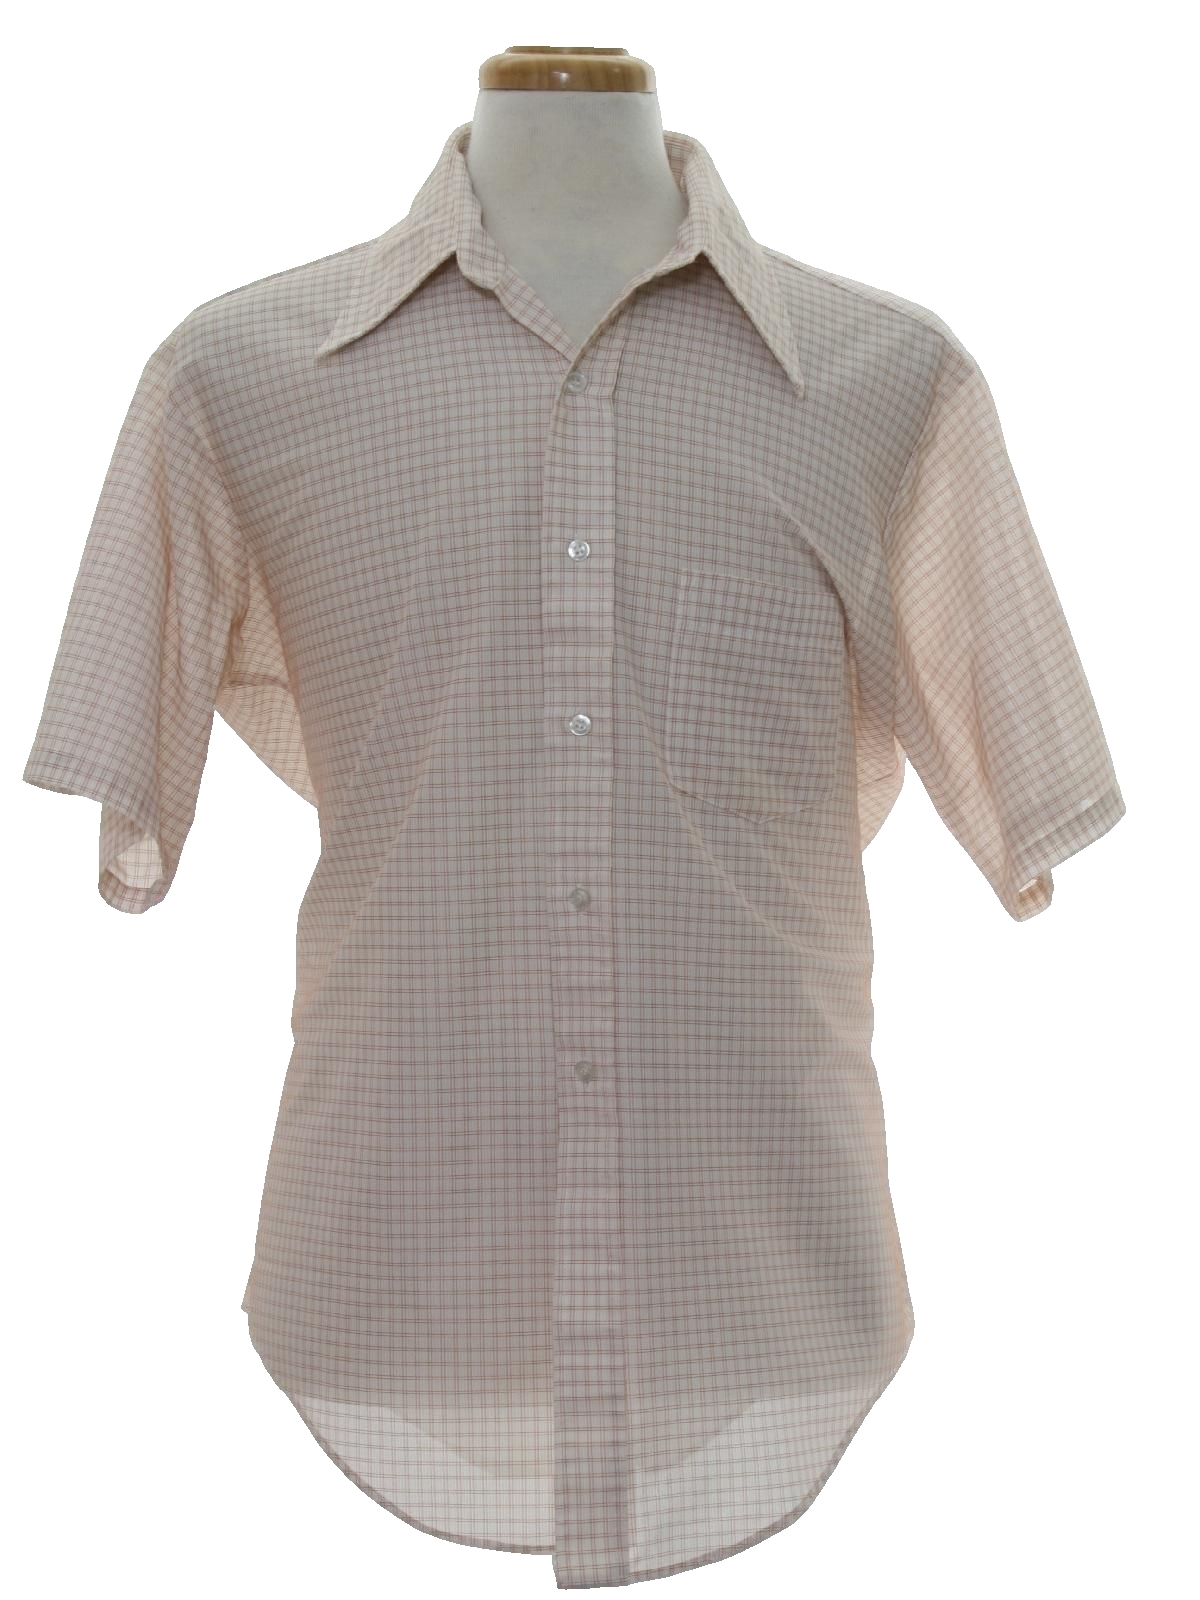 70's Vintage Shirt: 70s -Towncraft- Mens white background polyester ...